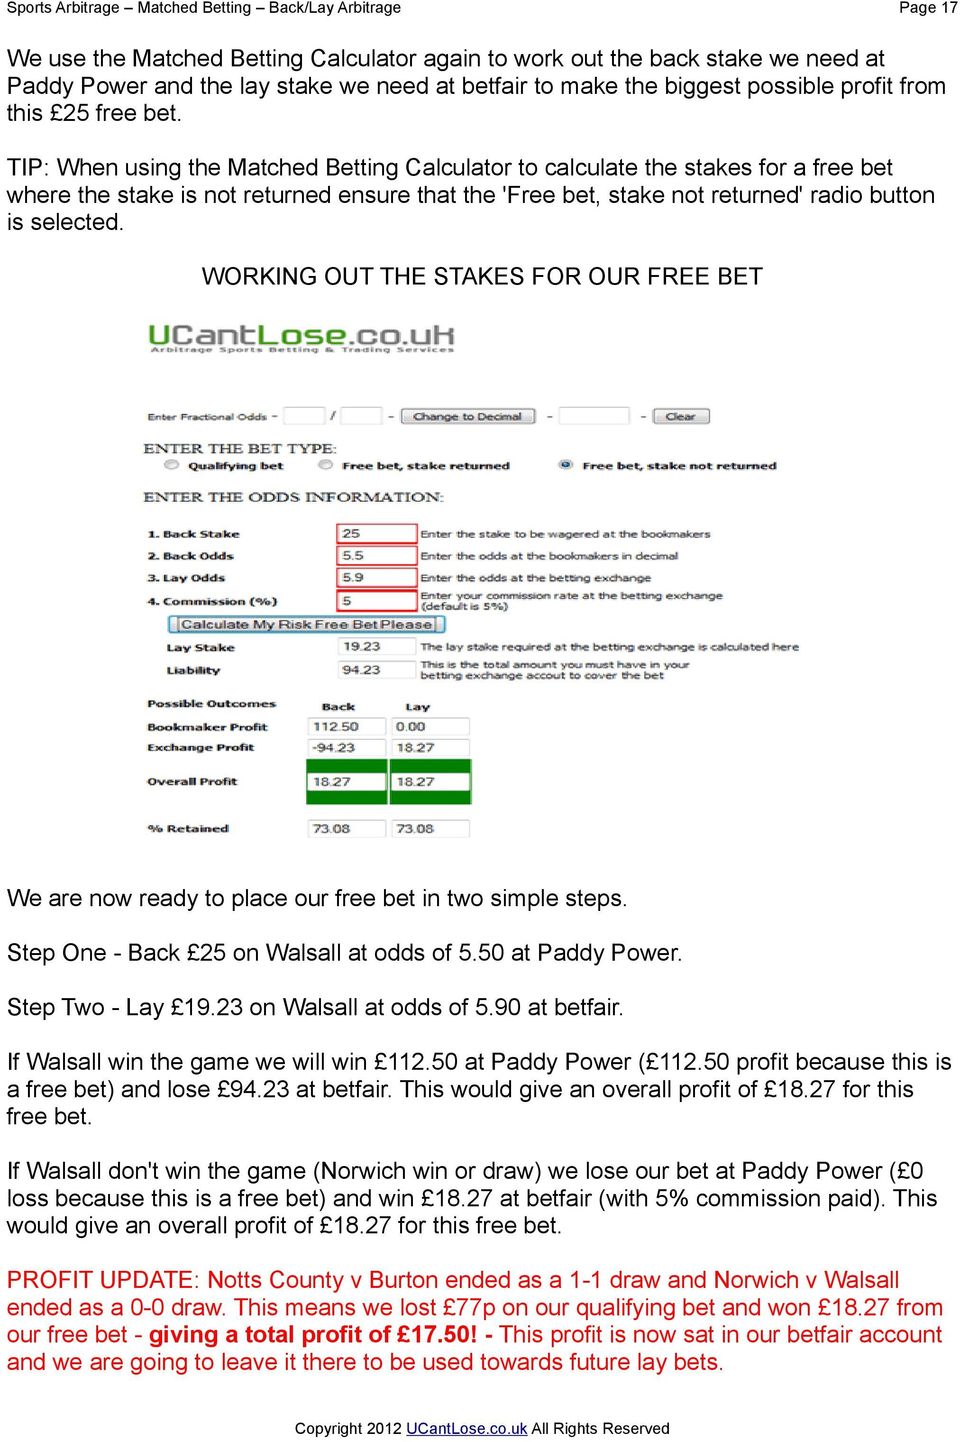 TIP: When using the Matched Betting Calculator to calculate the stakes for a free bet where the stake is not returned ensure that the 'Free bet, stake not returned' radio button is selected.